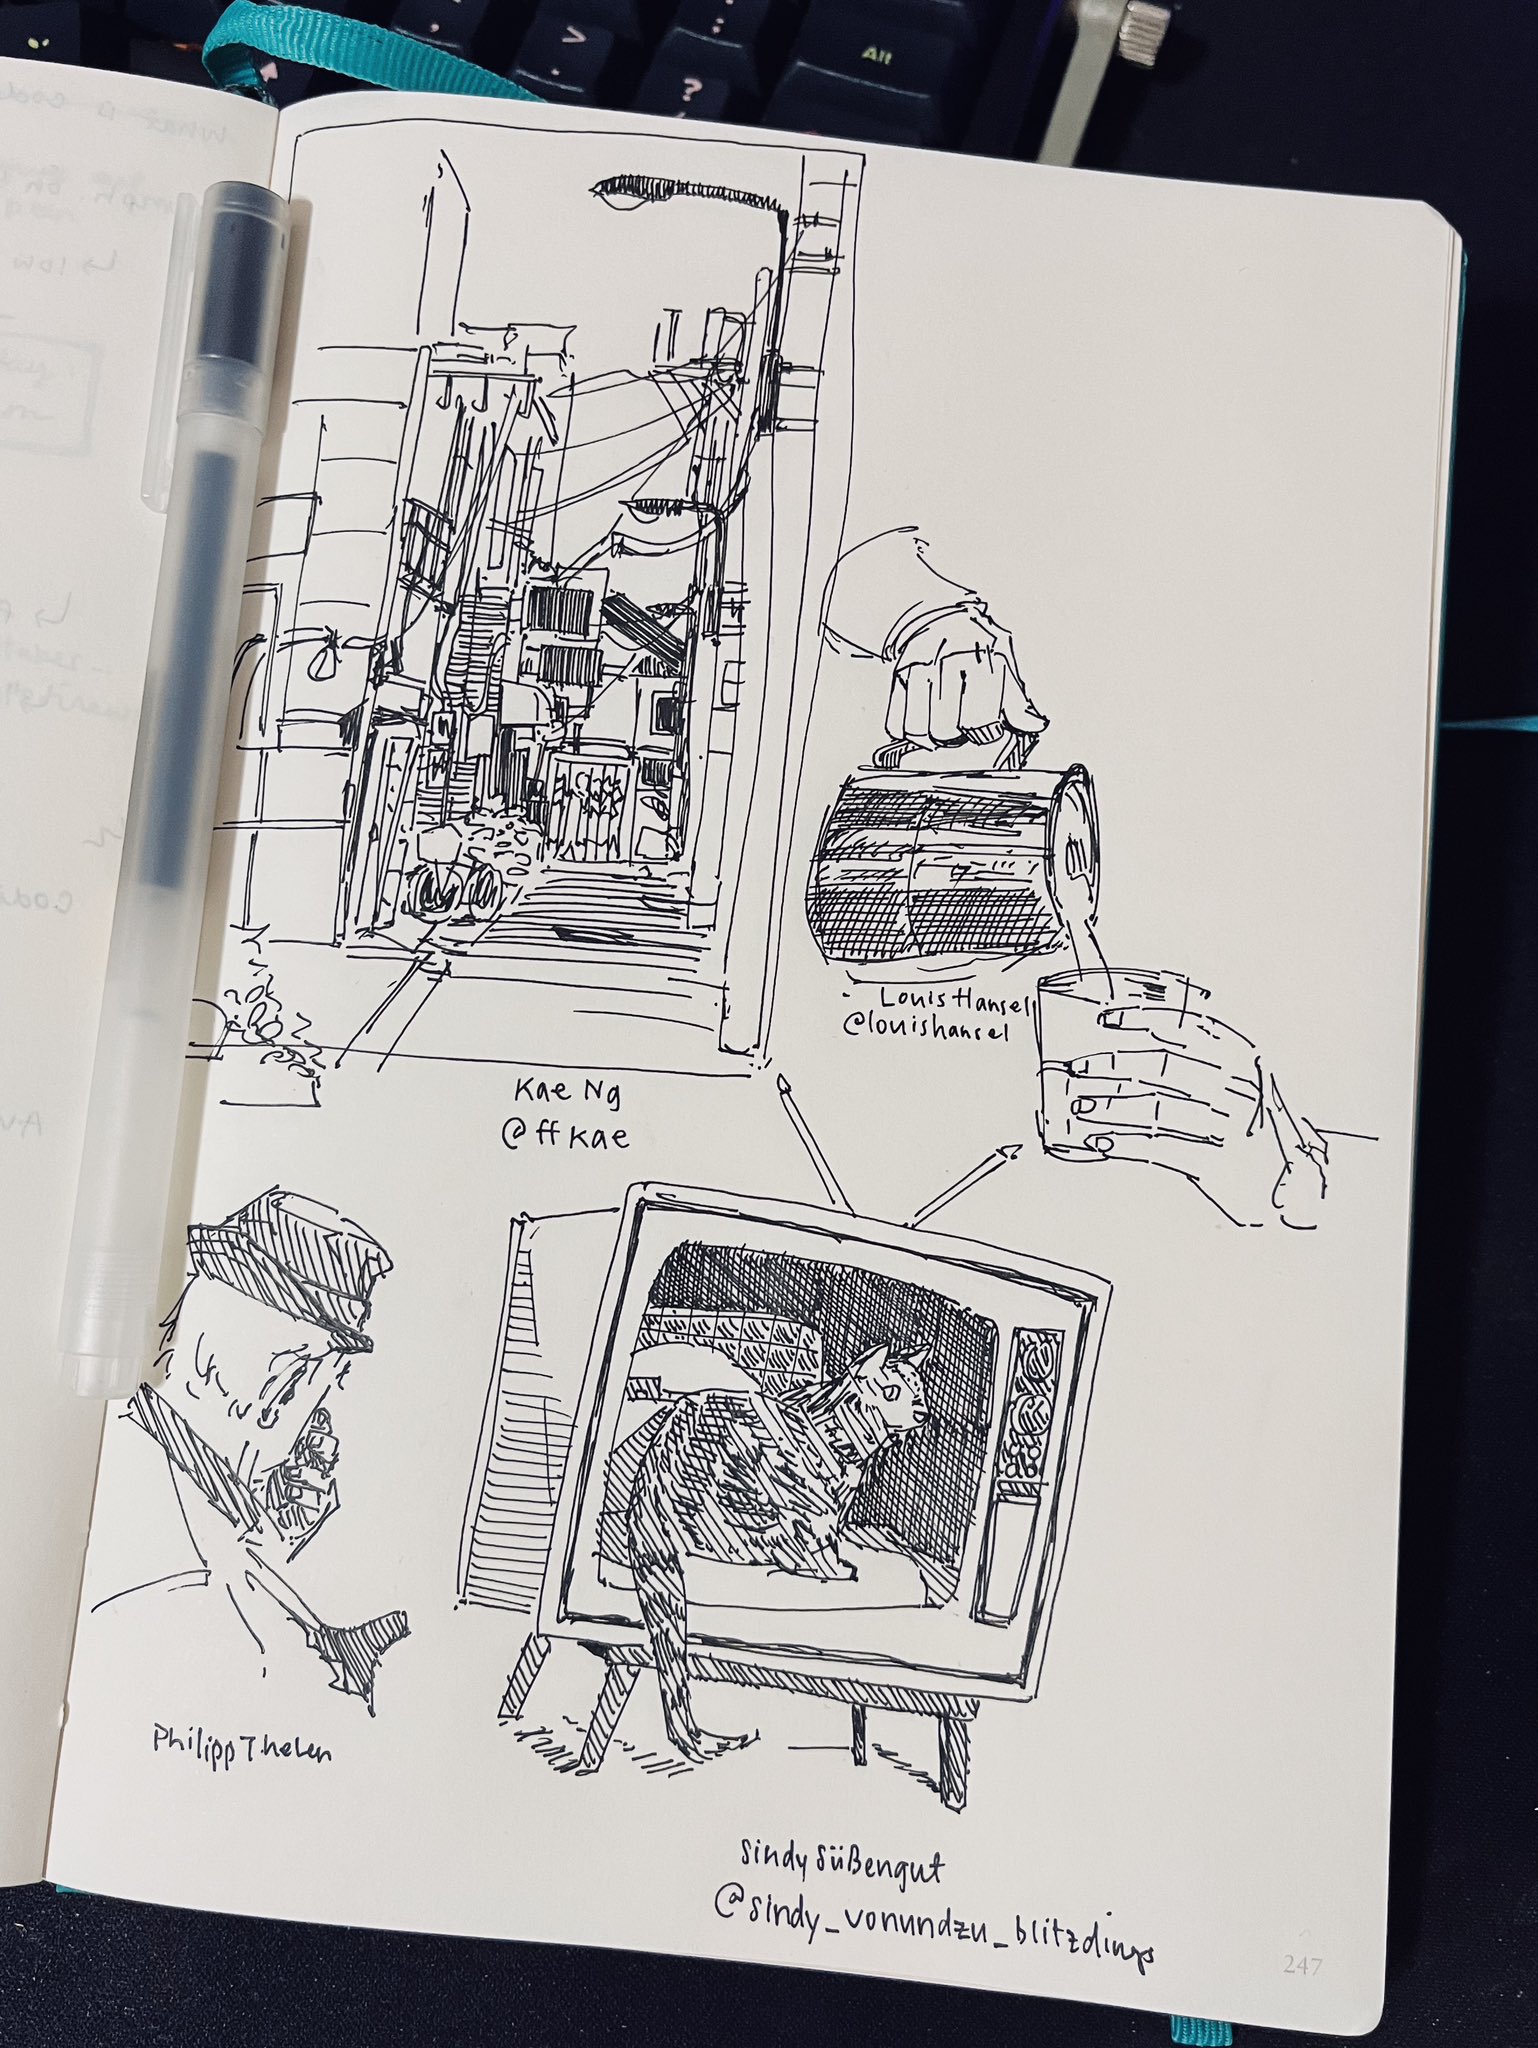 A few ink sketches: a narrow residential street in Japan, hands pouring coffee into a glass, the back of a man’s head, and a cat sitting inside a vintage television set.